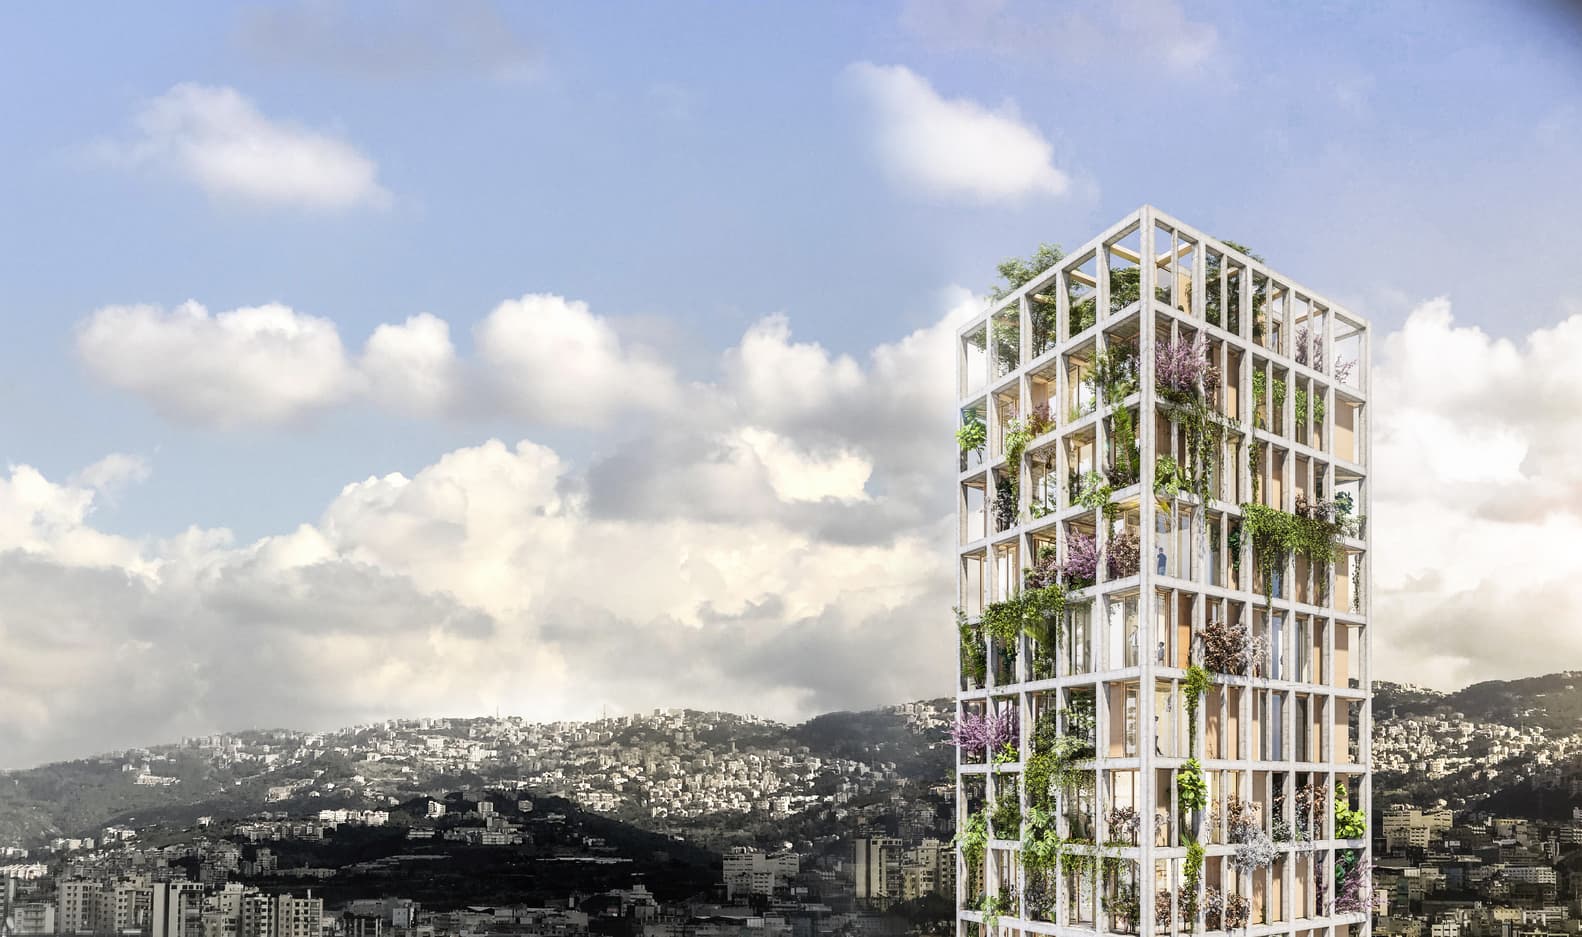 MM-tower-Beirut_10 Home Decor and Renovation Articles to Check Out - July 2020